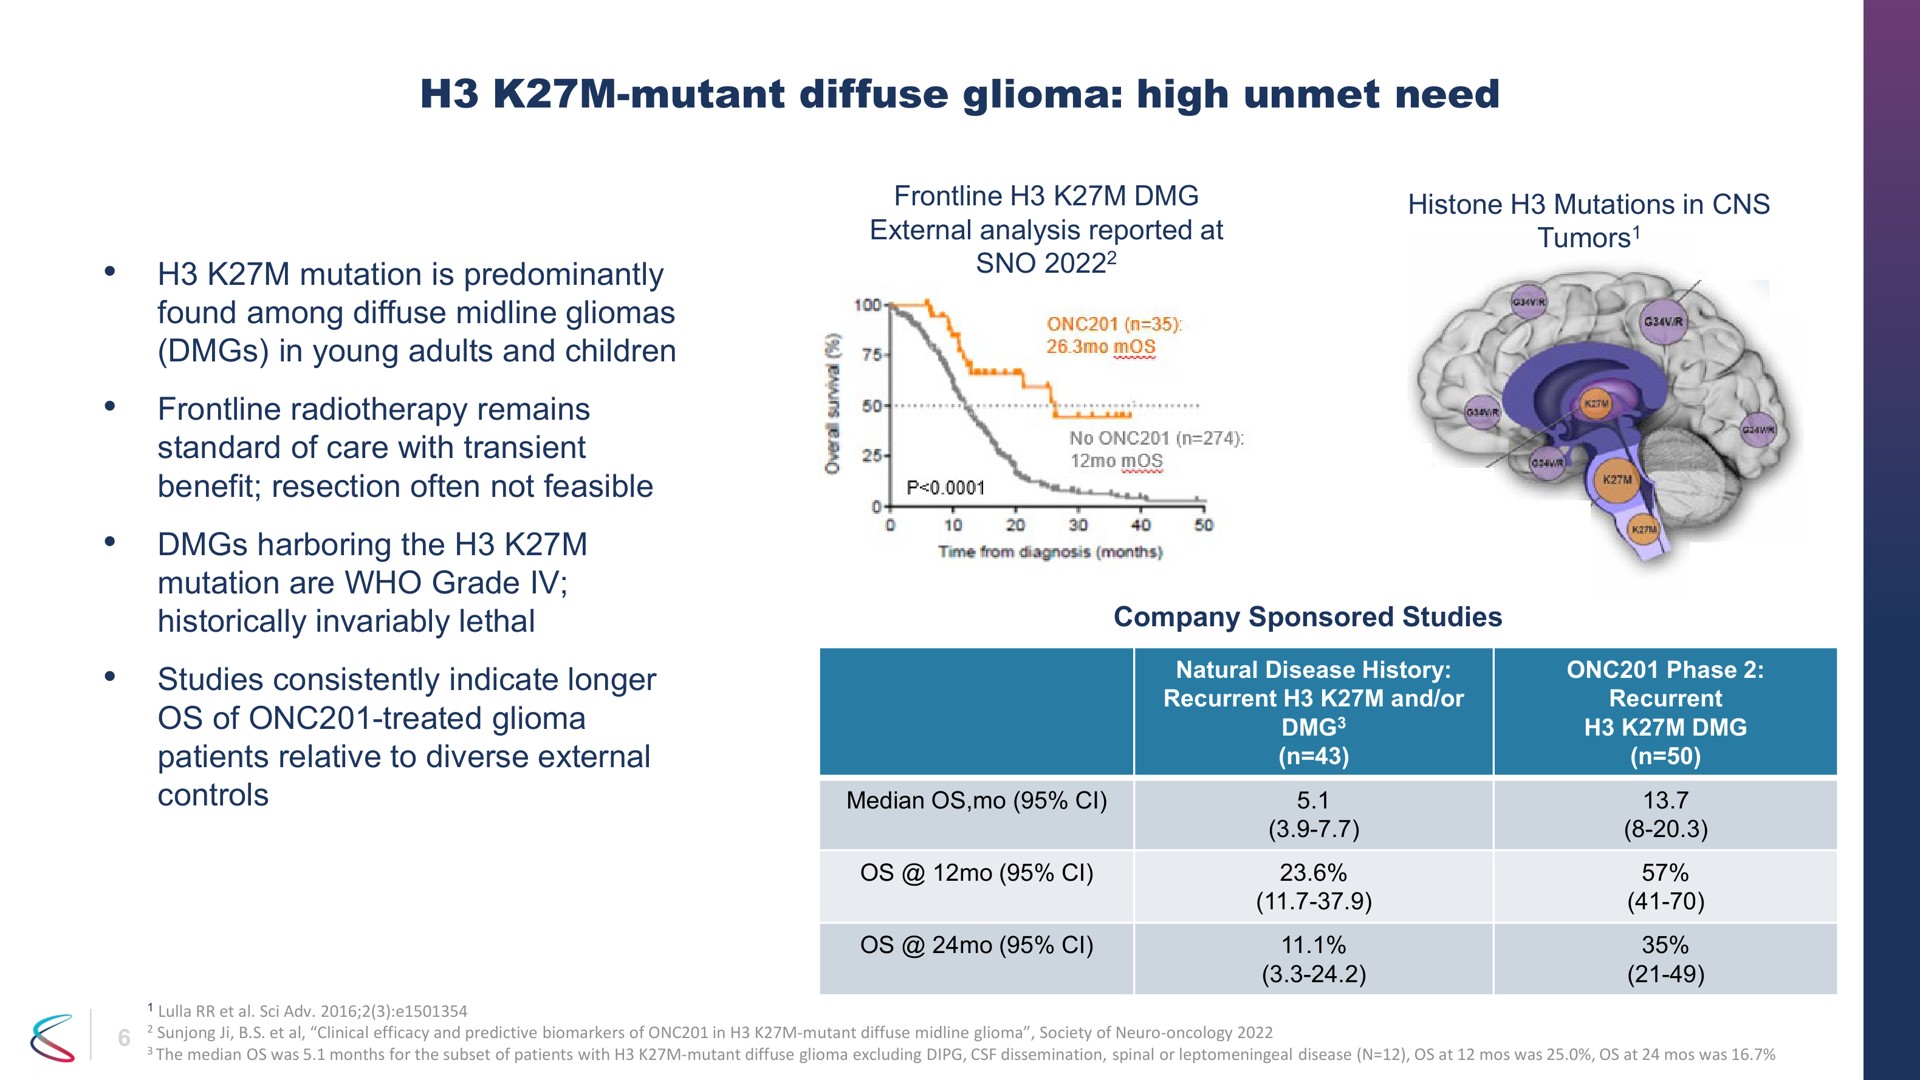 mutant diffuse glioma high unmet need in young adults and children historically invariably lethal company sponsored studies | Chimerix